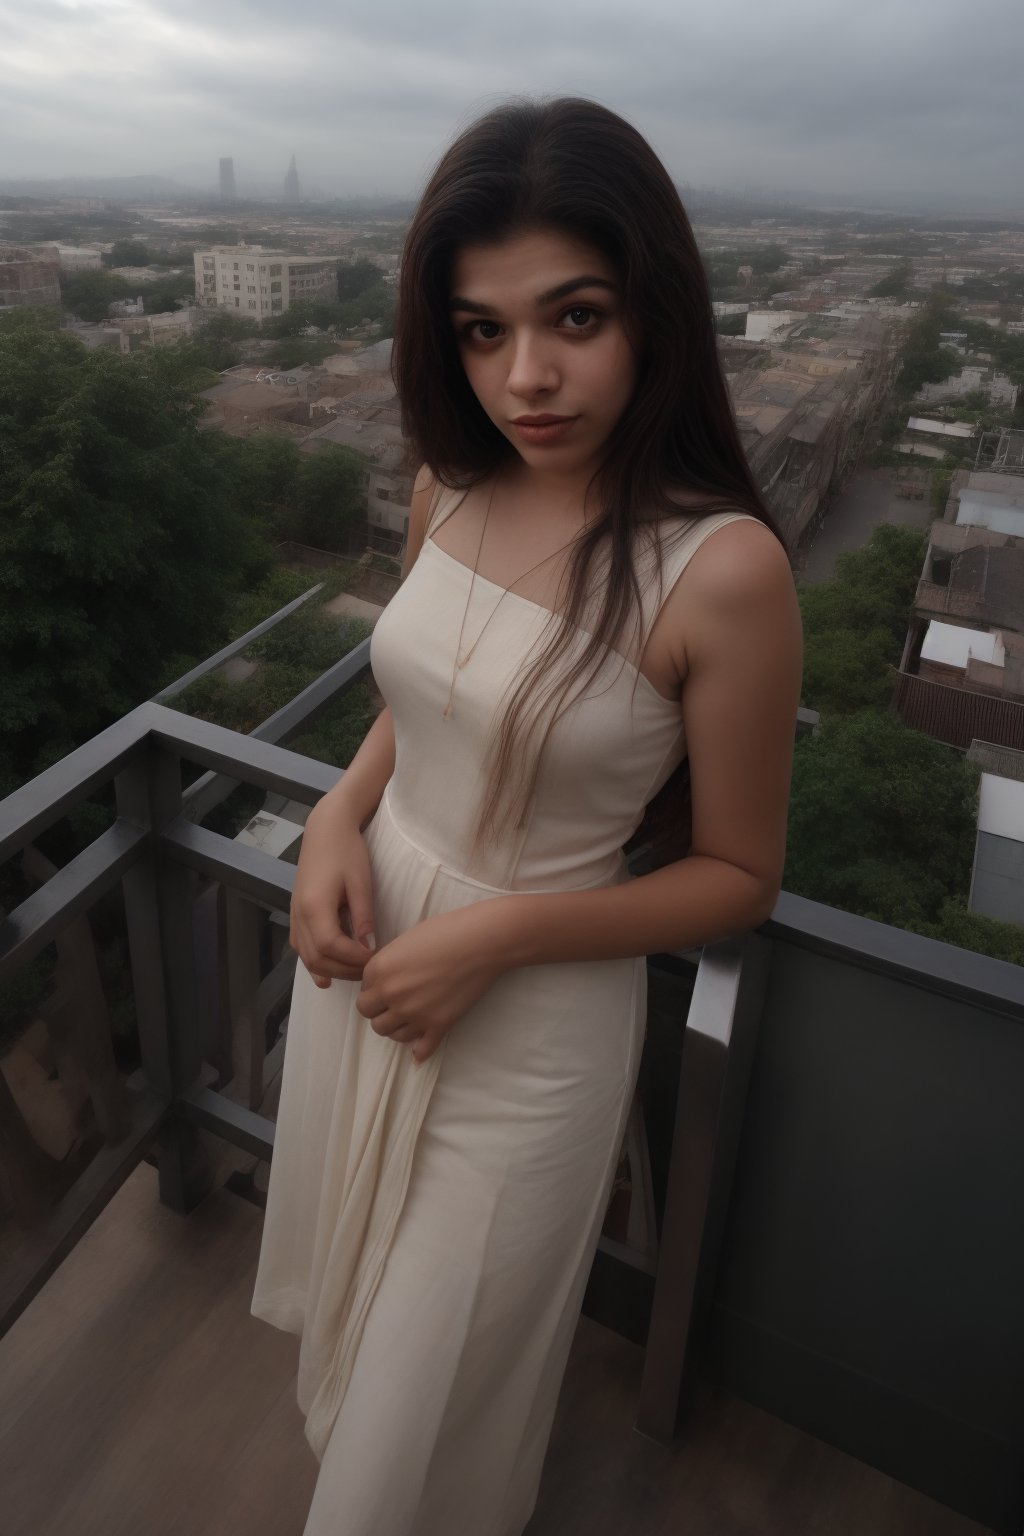 A stunning young woman with long, gazes directly into the camera lens. Her dark skin glows warmly in the soft light as she stands poised on a balcony railing, wearing a flowing white dress that seems to shimmer in the gentle illumination. Her eyes sparkle with an air of confidence and poise.